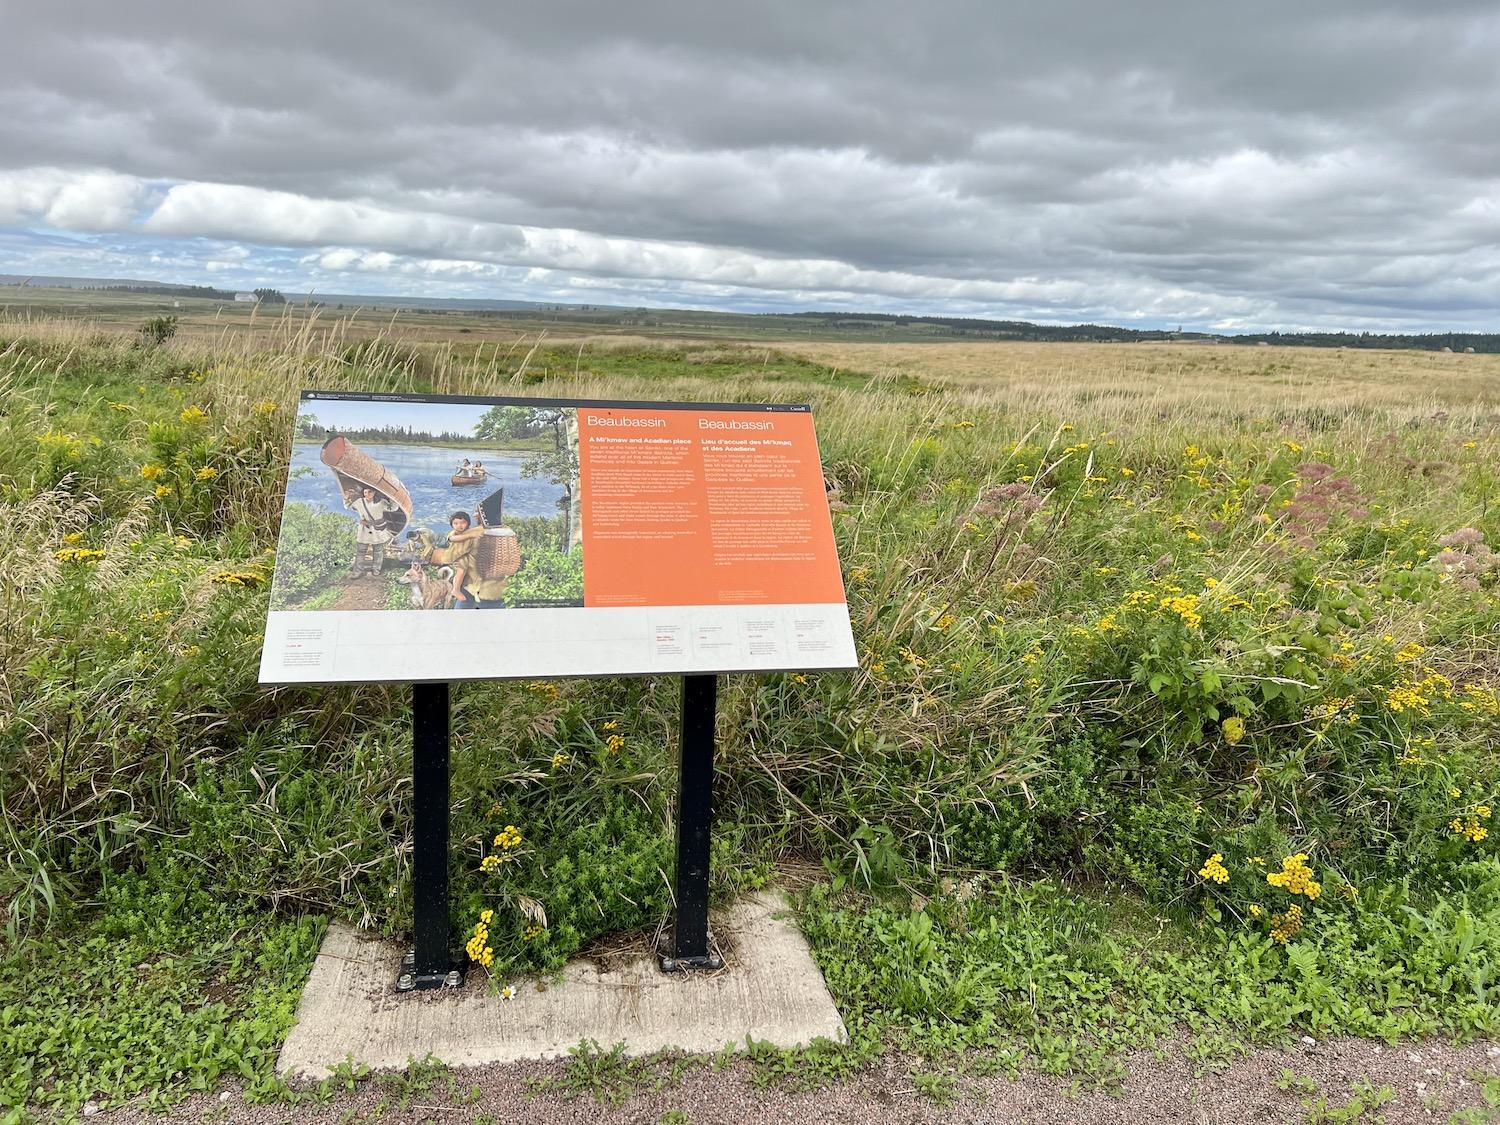 When a Parks Canada site isn't staffed, interpretive panels are a key way to convey the historical story.